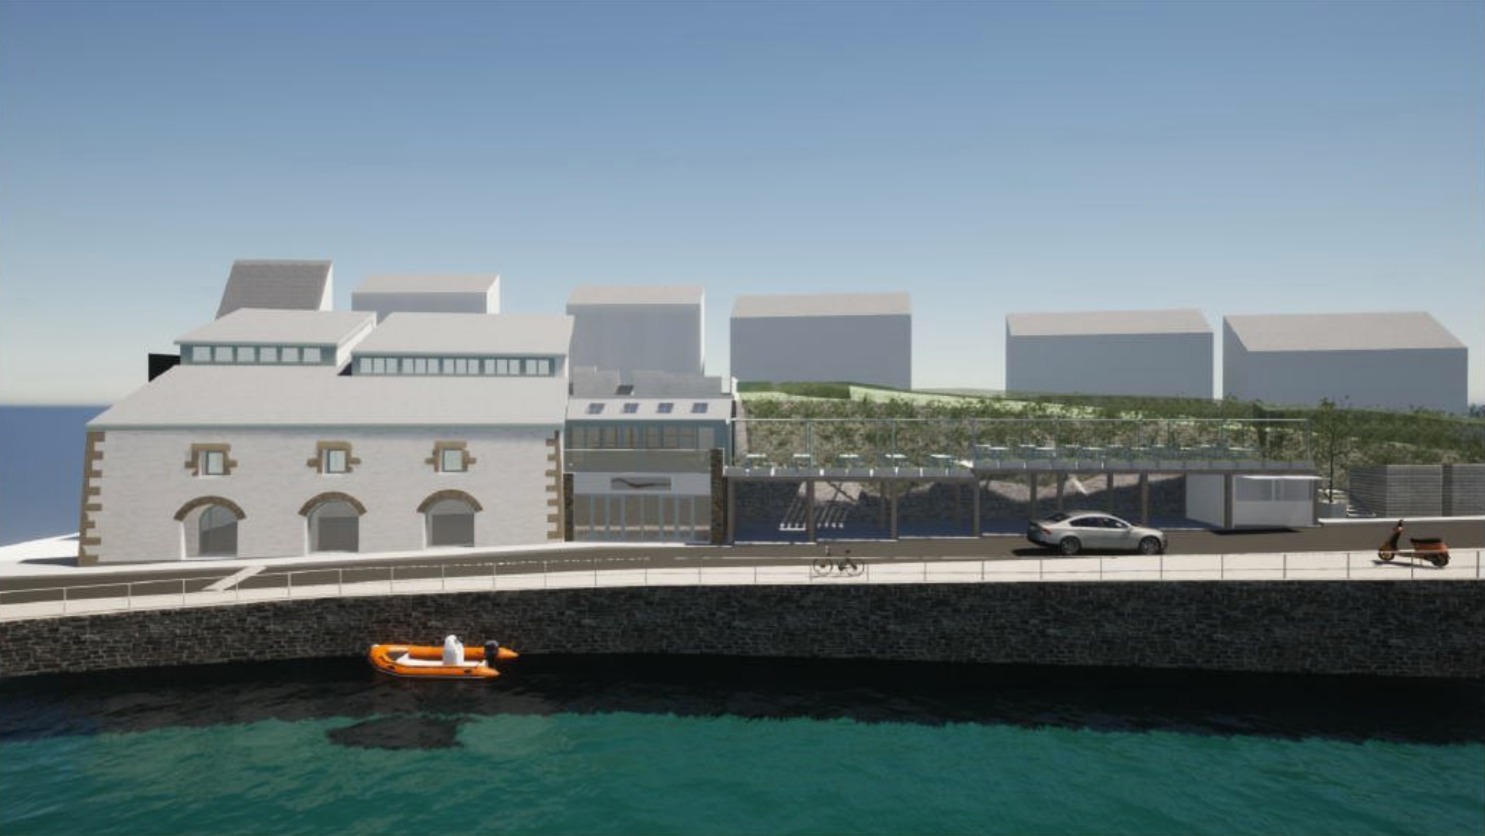 CGI of the proposed Porthleven harbourside restaurant plans which have been refused permission